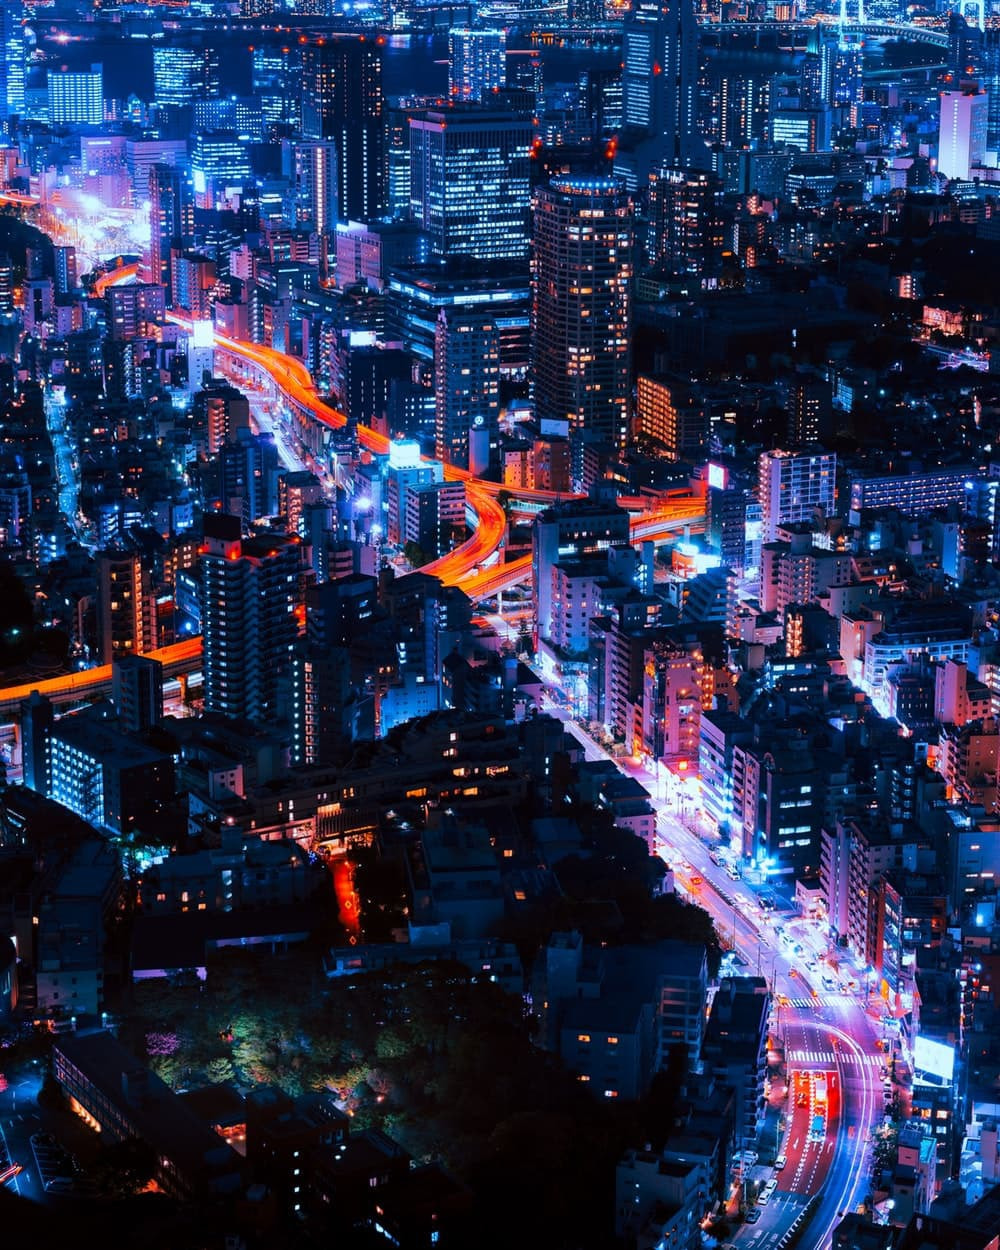 Overview of a vibrant city with strong flourescent colors at night.